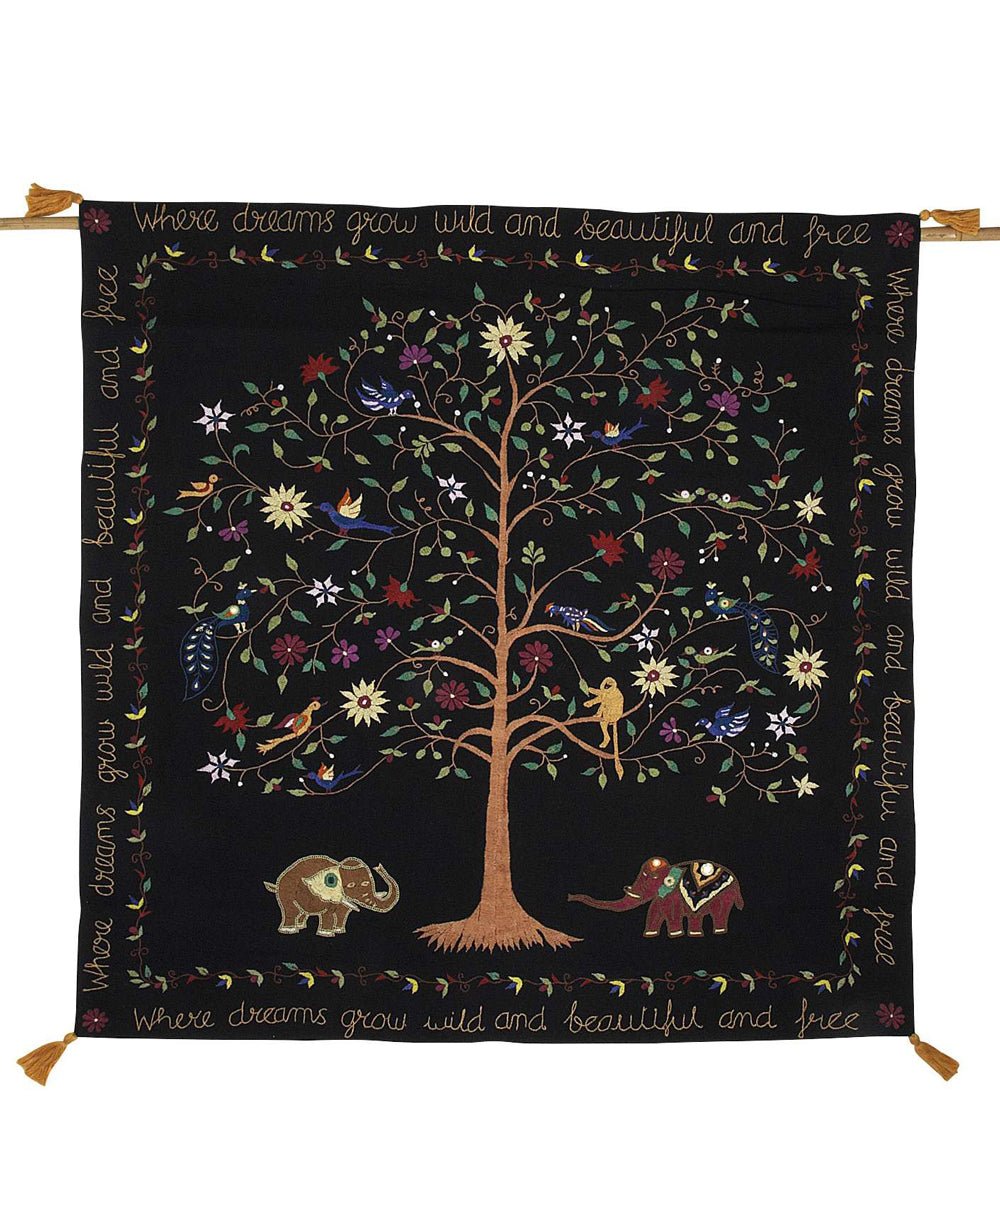 Hand-Embroidered Tree of Life Wall Hanging, Fair Trade - Posters, Prints, & Visual Artwork